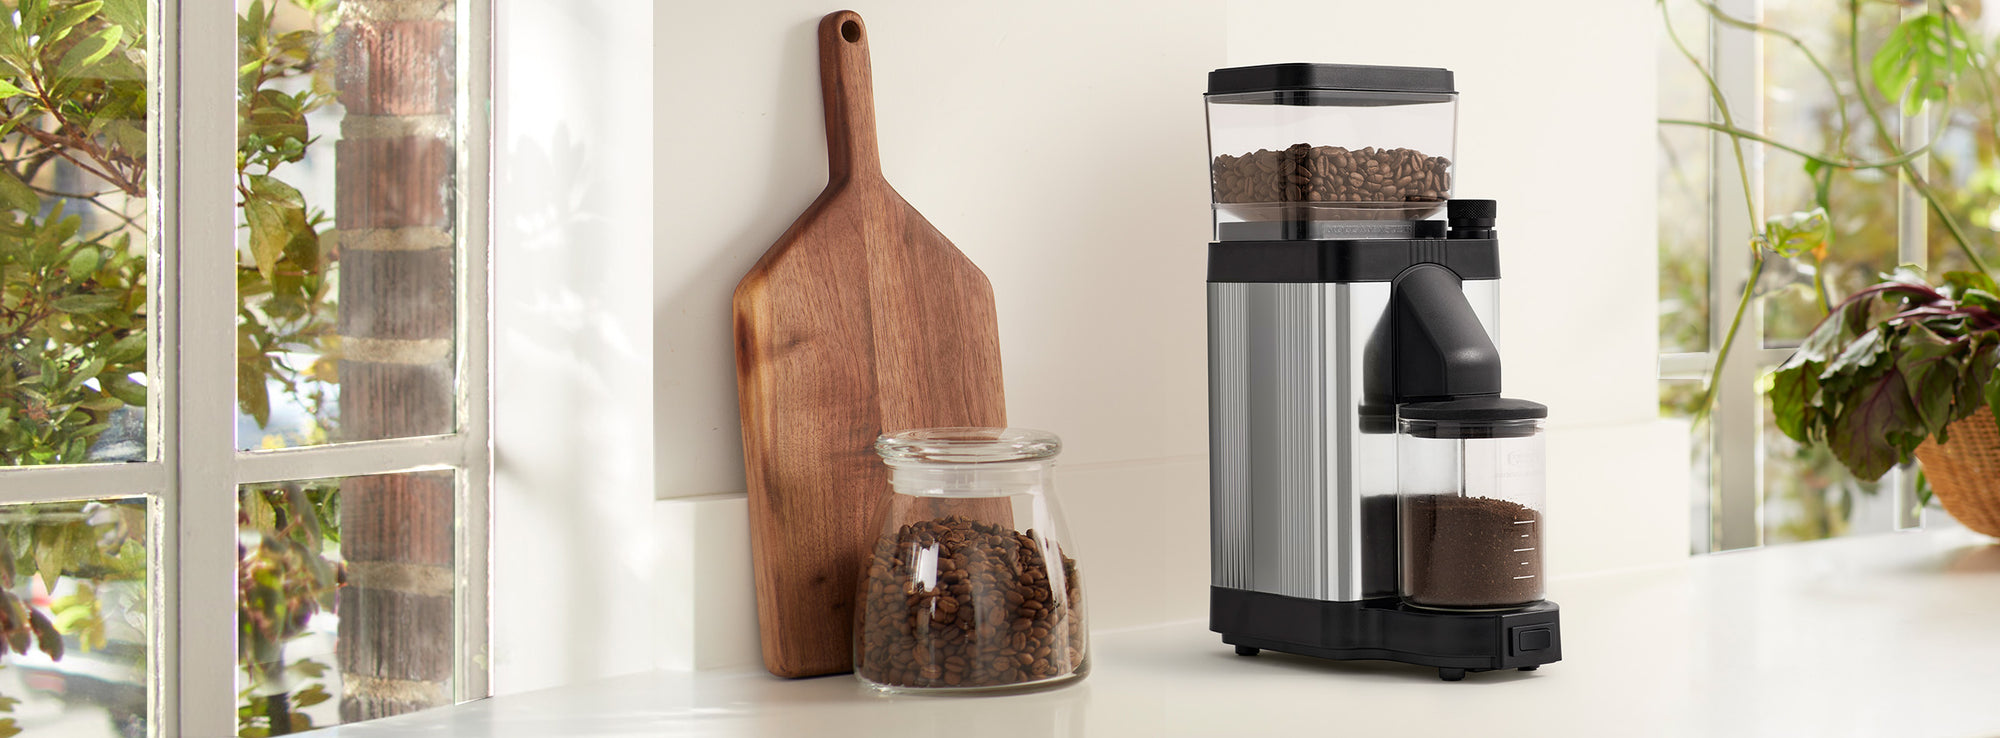 Technivorm Moccamaster Brews its First Burr Grinder, the KM5Daily